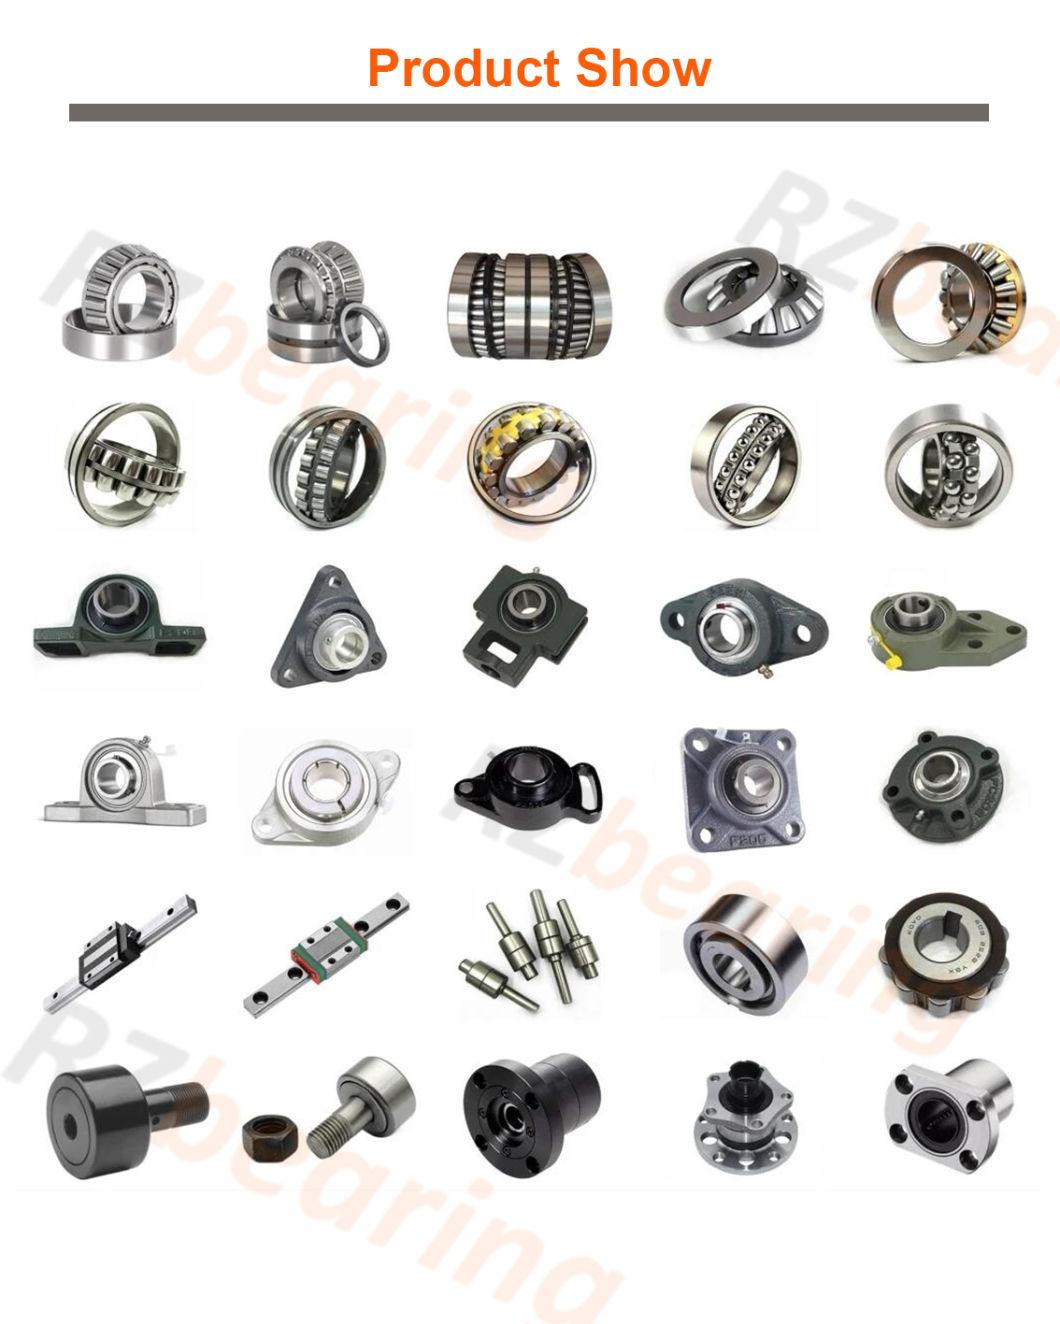 Bearing Deep Groove Ball Bearing 6215 for Auto Parts Engine Spare Parts Bearing with Low Price